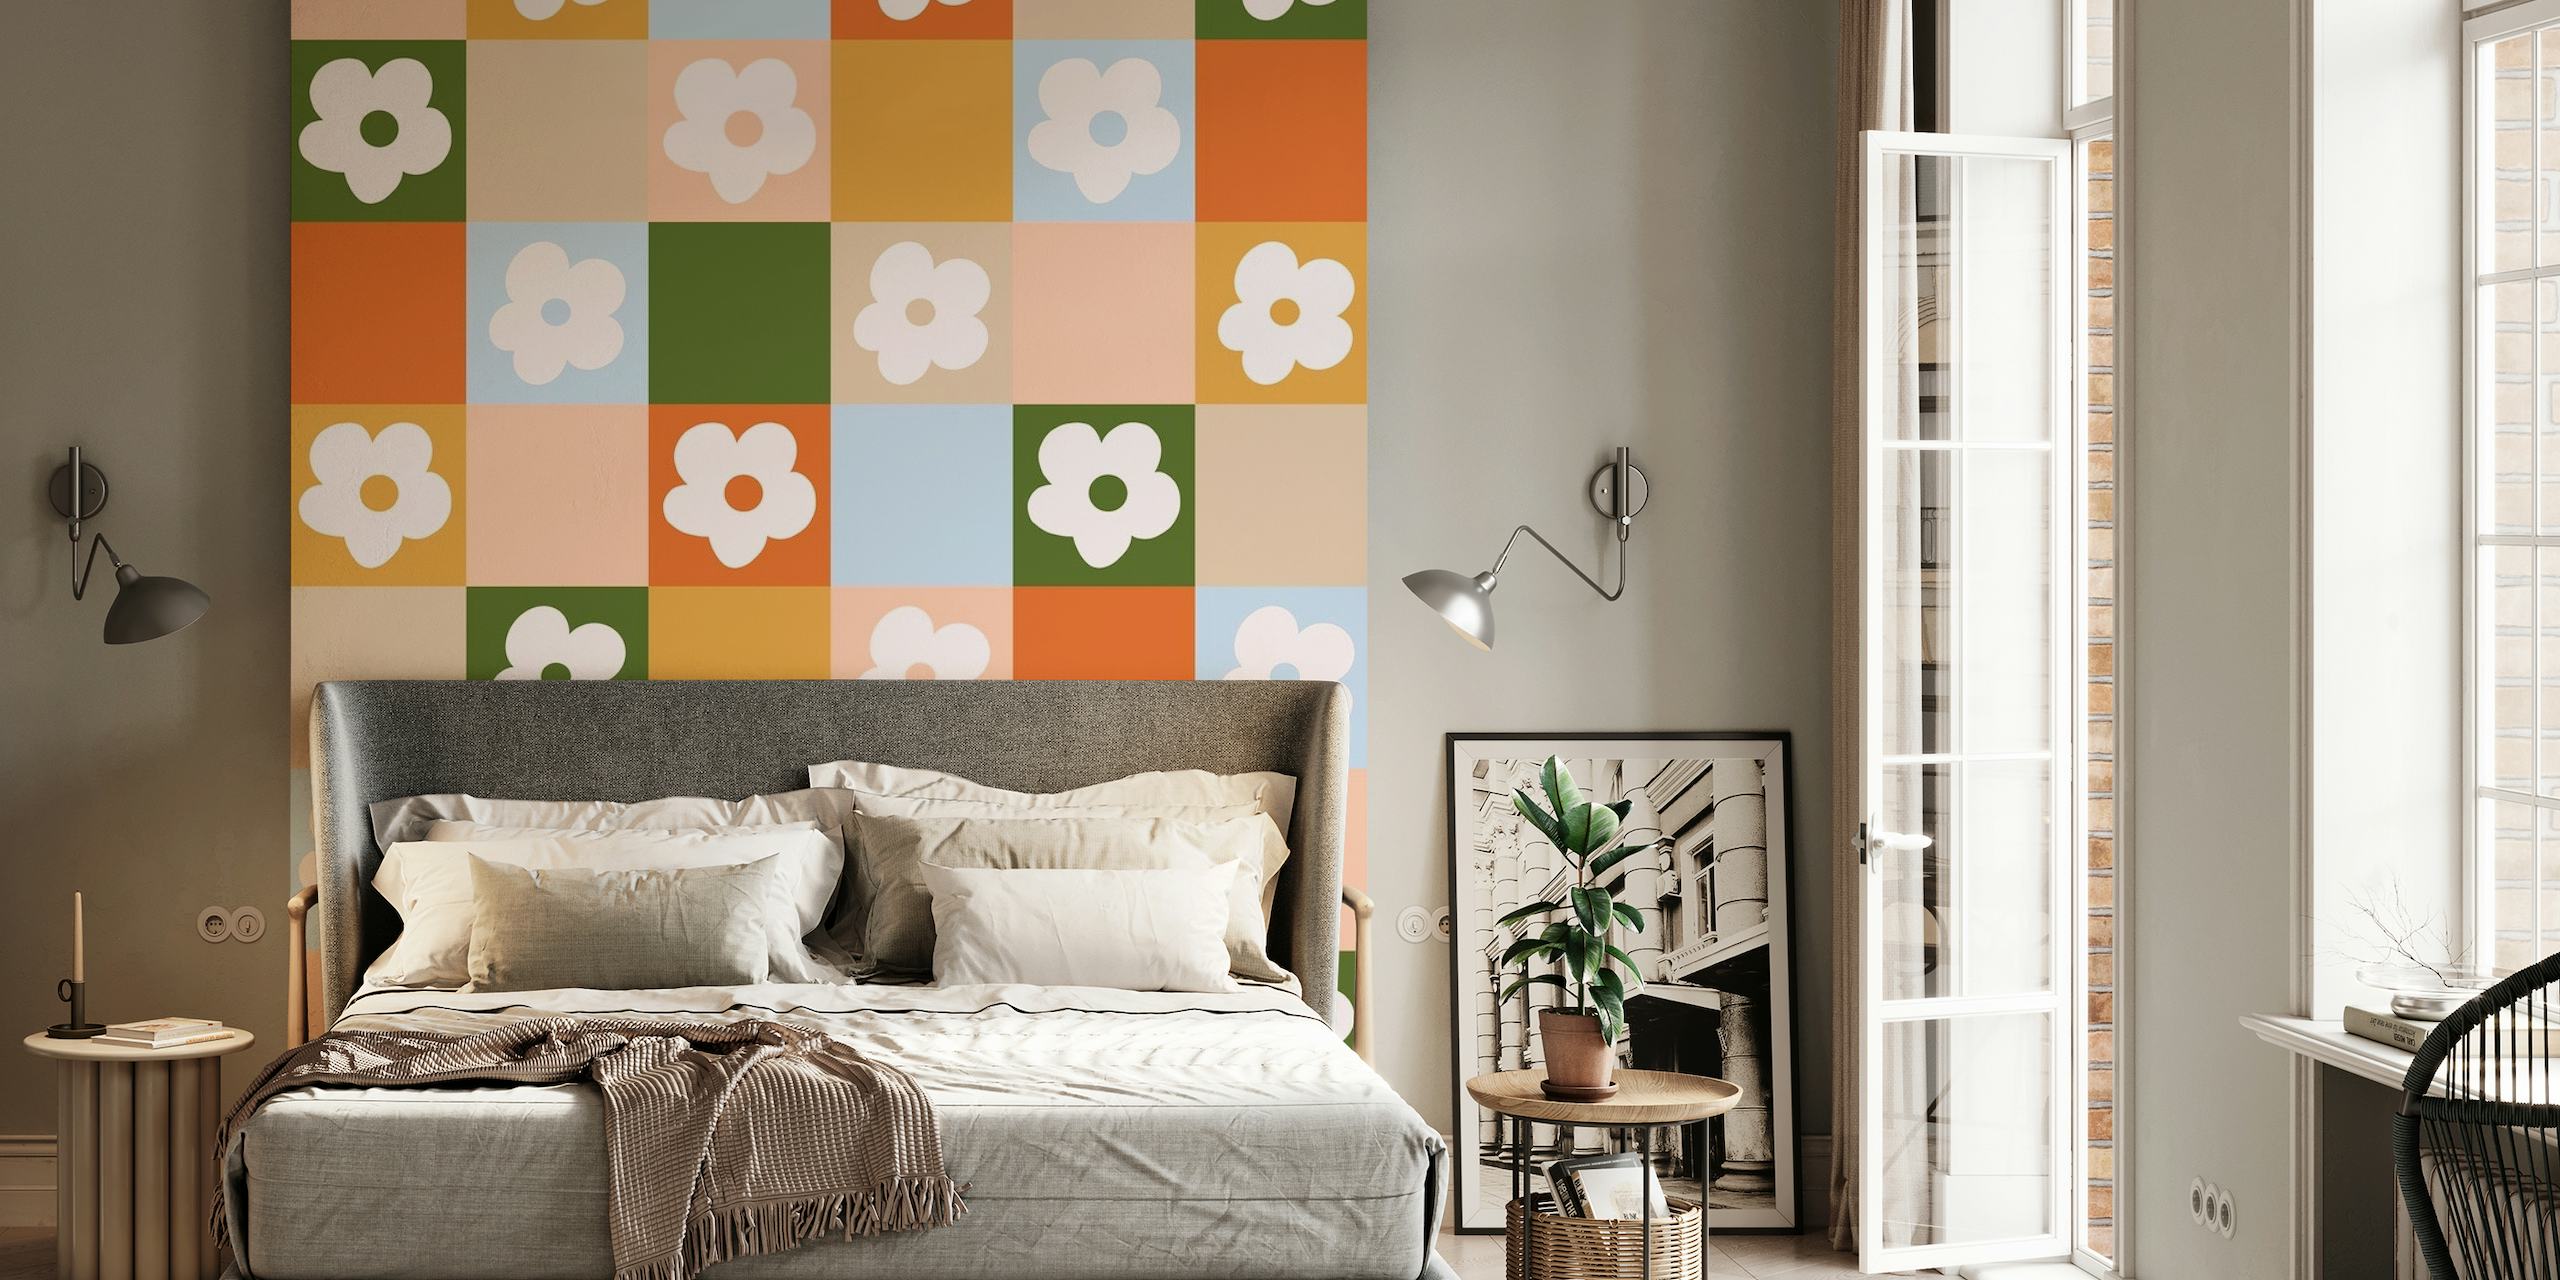 Colorful retro checkered pattern wall mural with floral accents